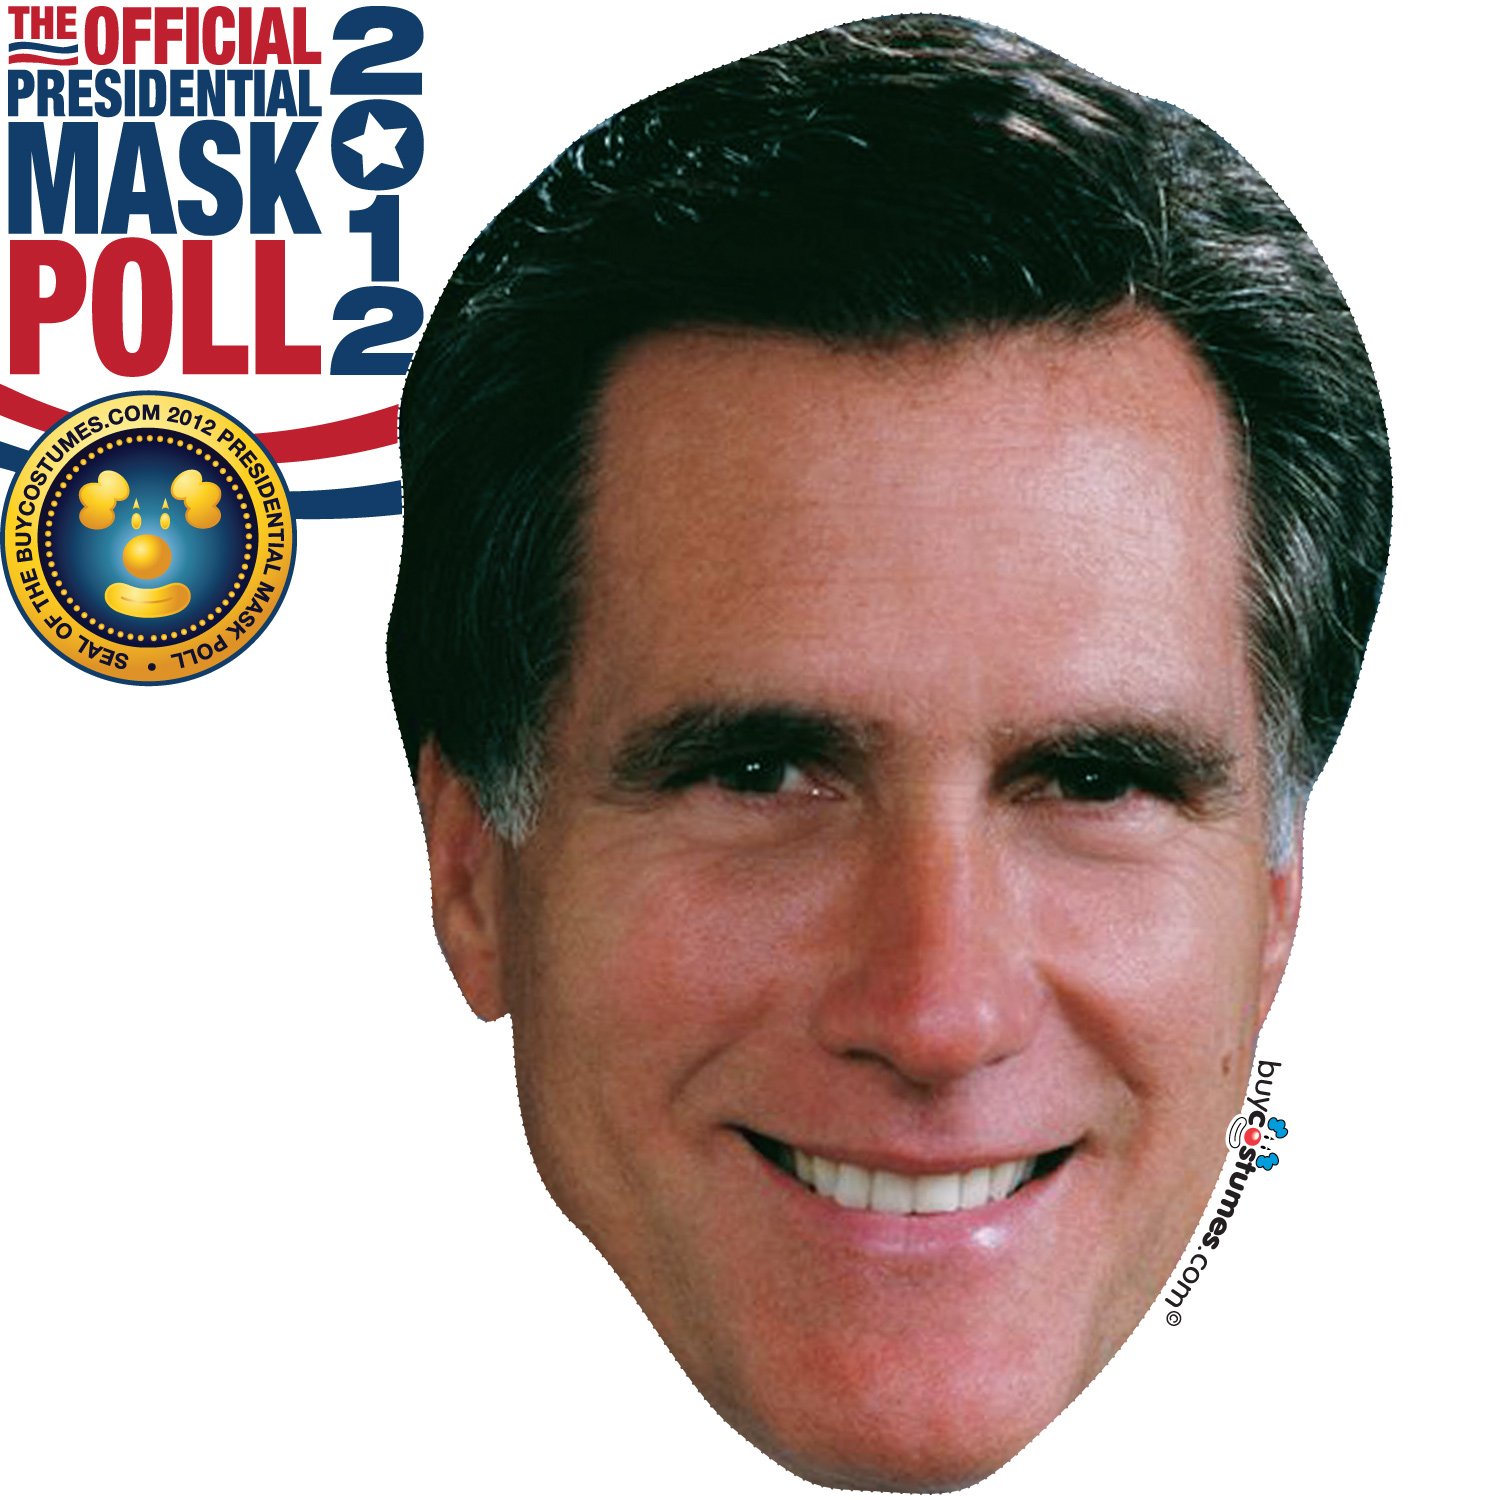 BuyCostumes.com Mask Poll to Gauge Super Tuesday Election Results1500 x 1500